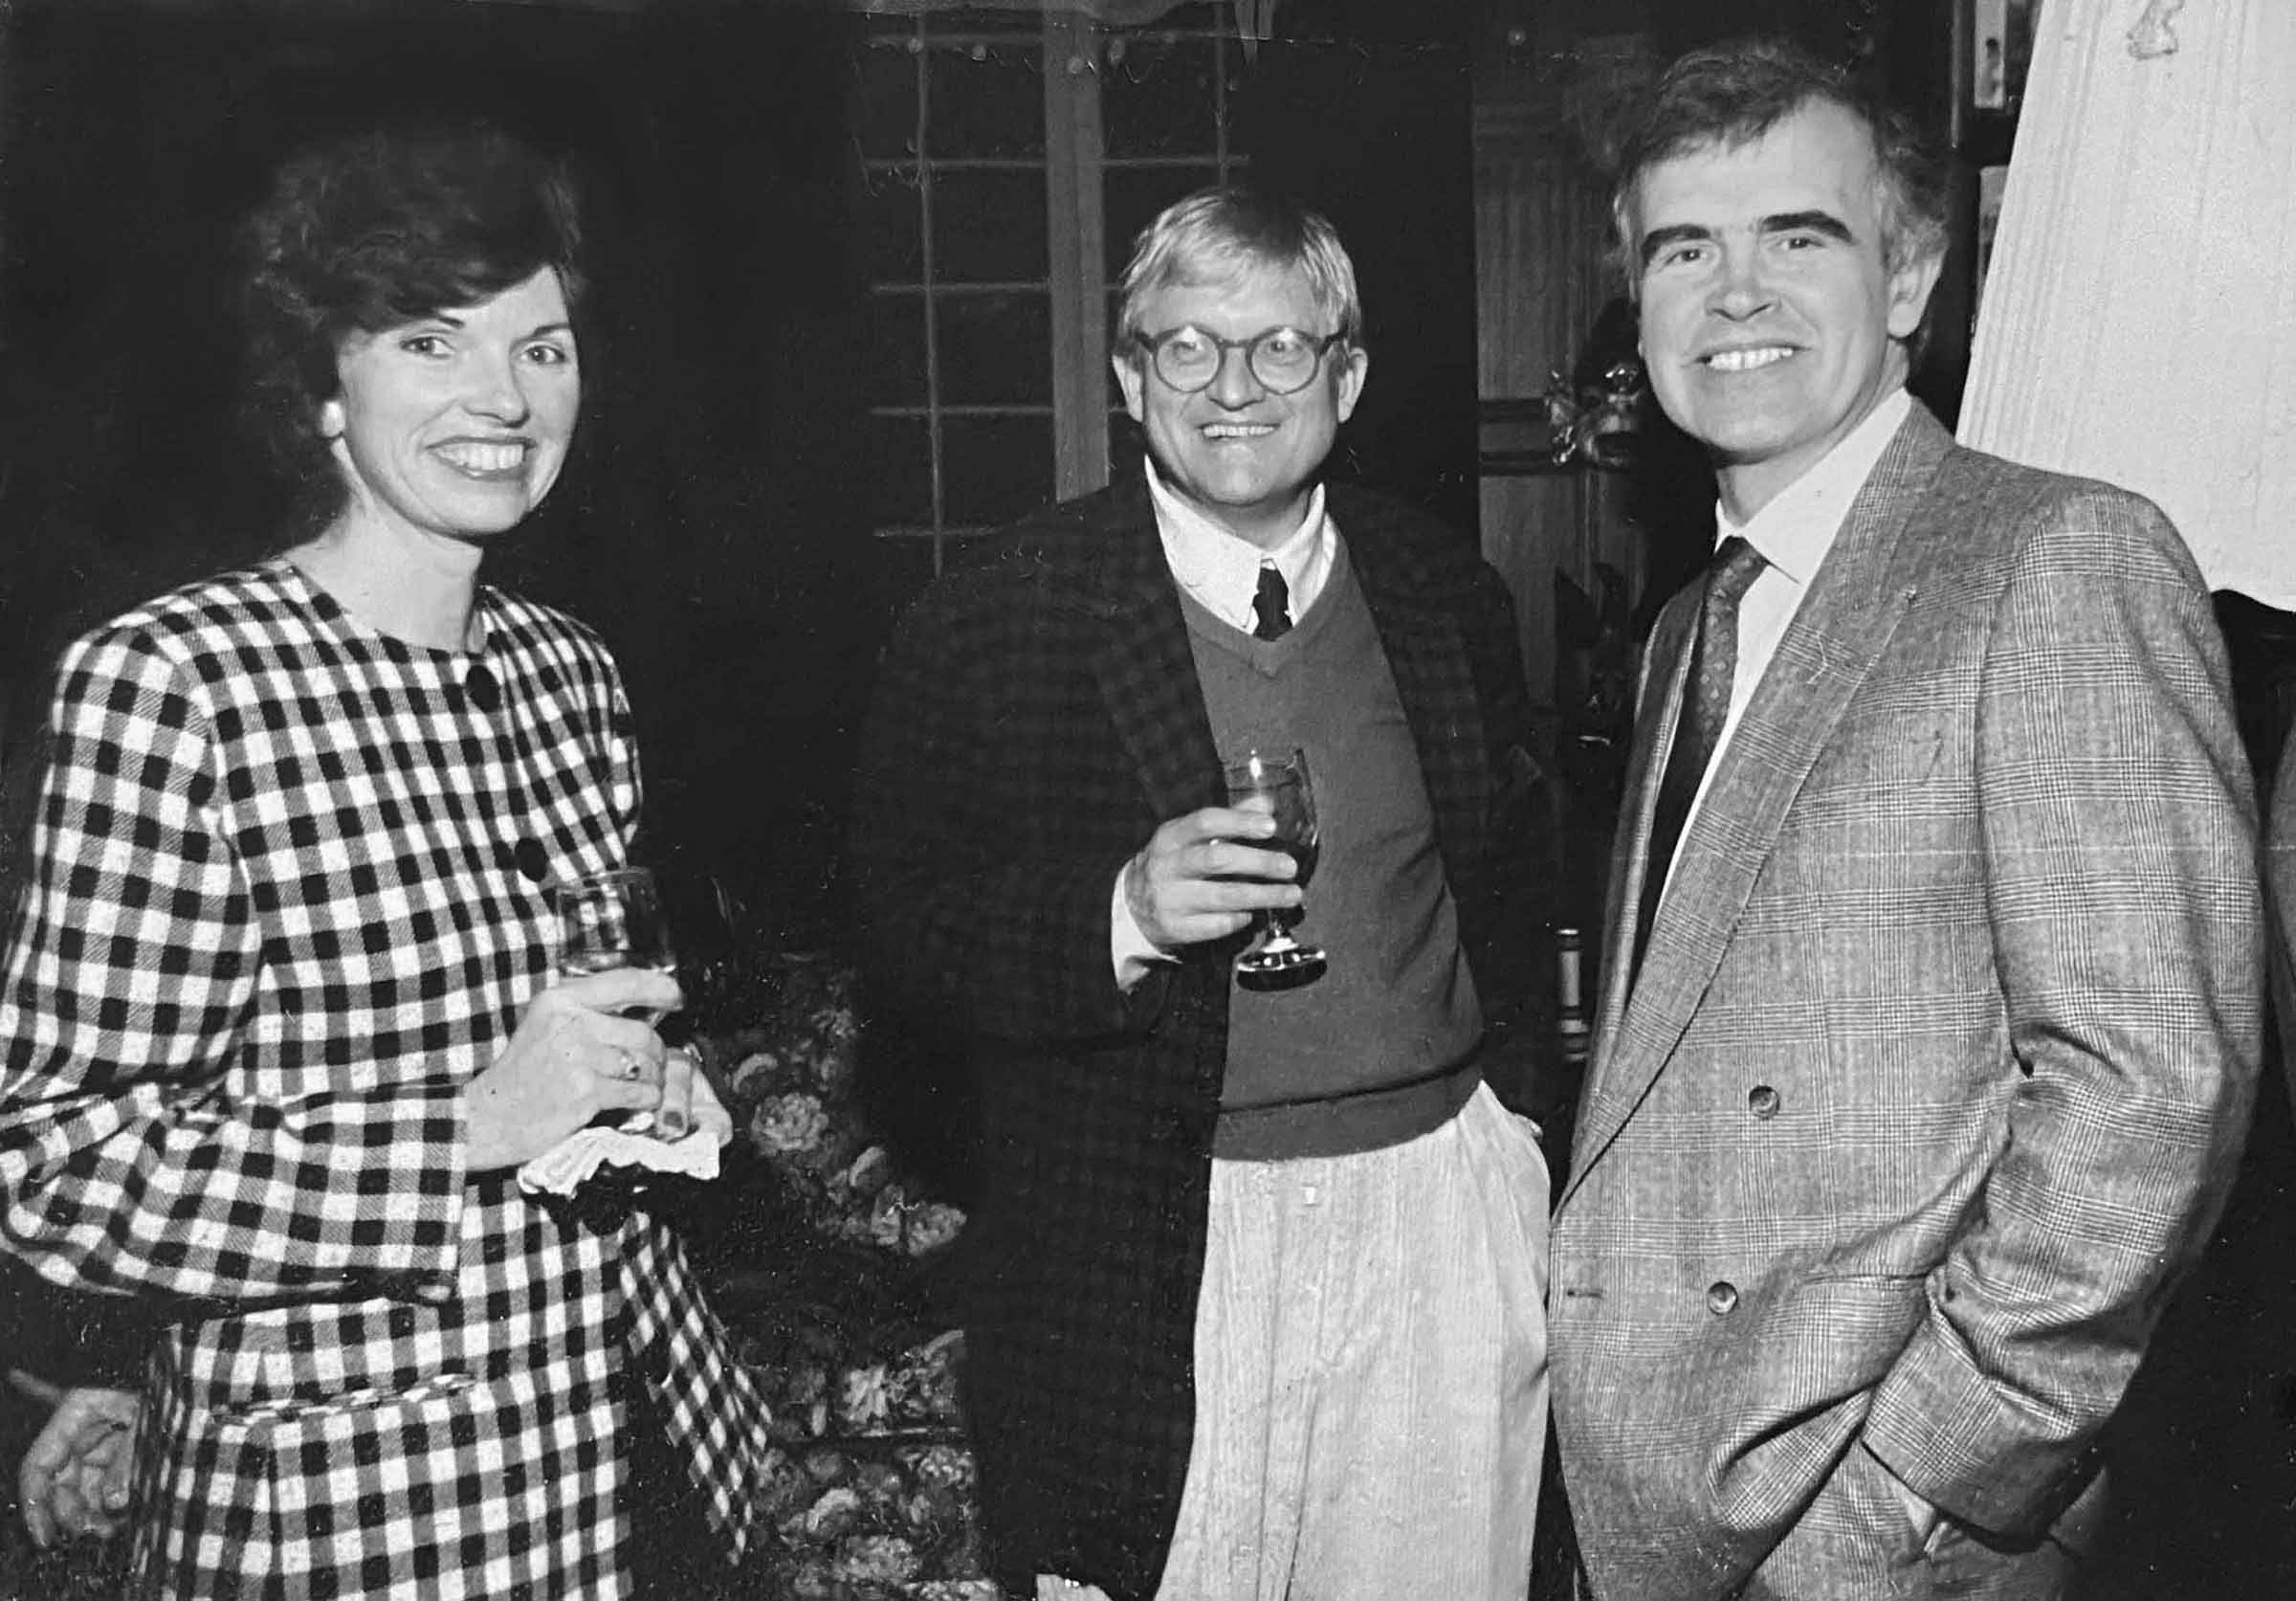 Diane and Ralph Waterhouse with David Hockney at the British Consulate LA in 1989